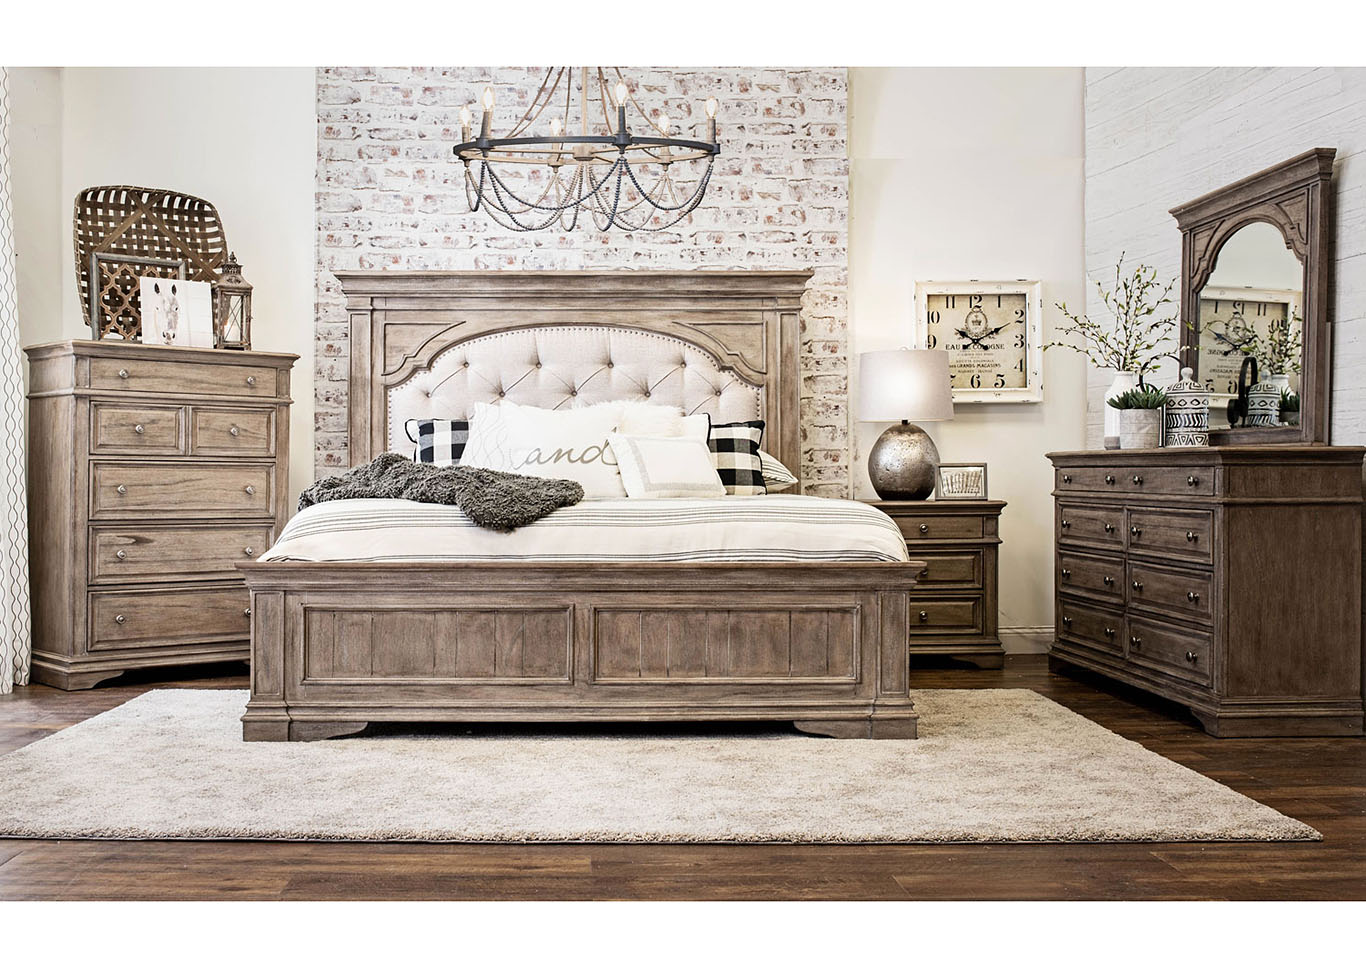 Highland Park Avenue Waxed Driftwood Panel Queen Bed,Steve Silver